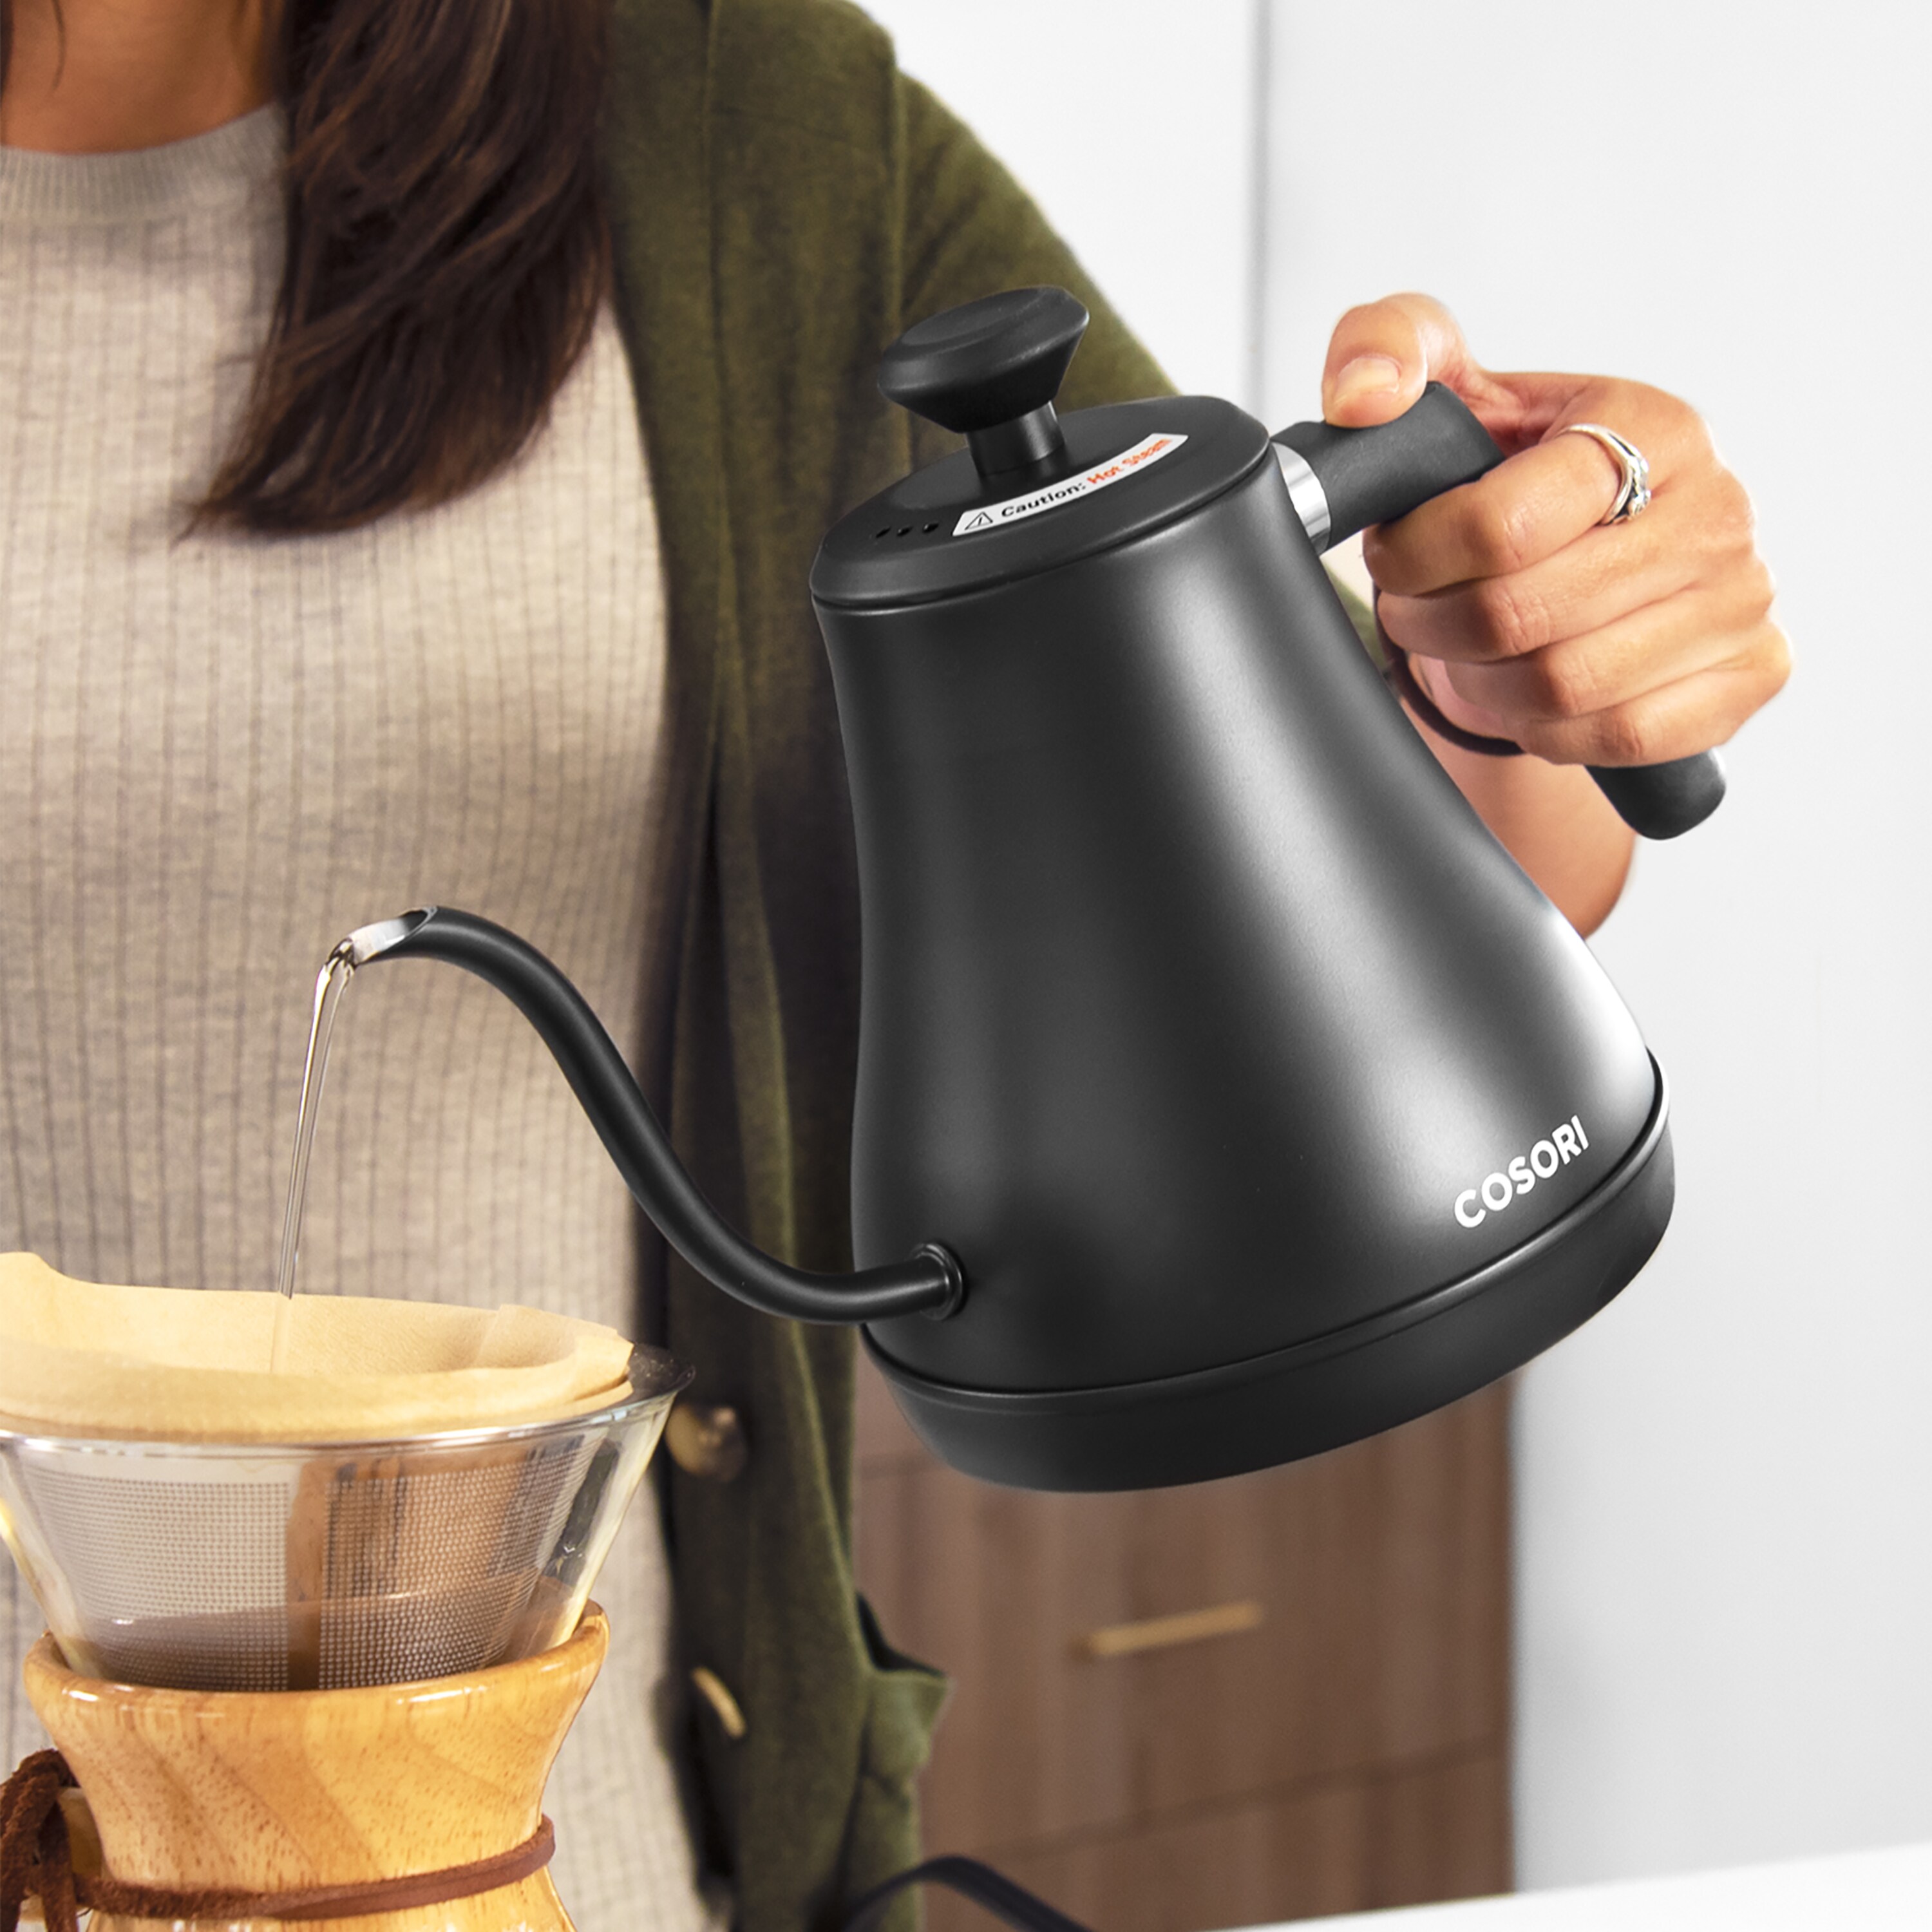 Cosori Black 2-Cup Corded Digital Electric Kettle